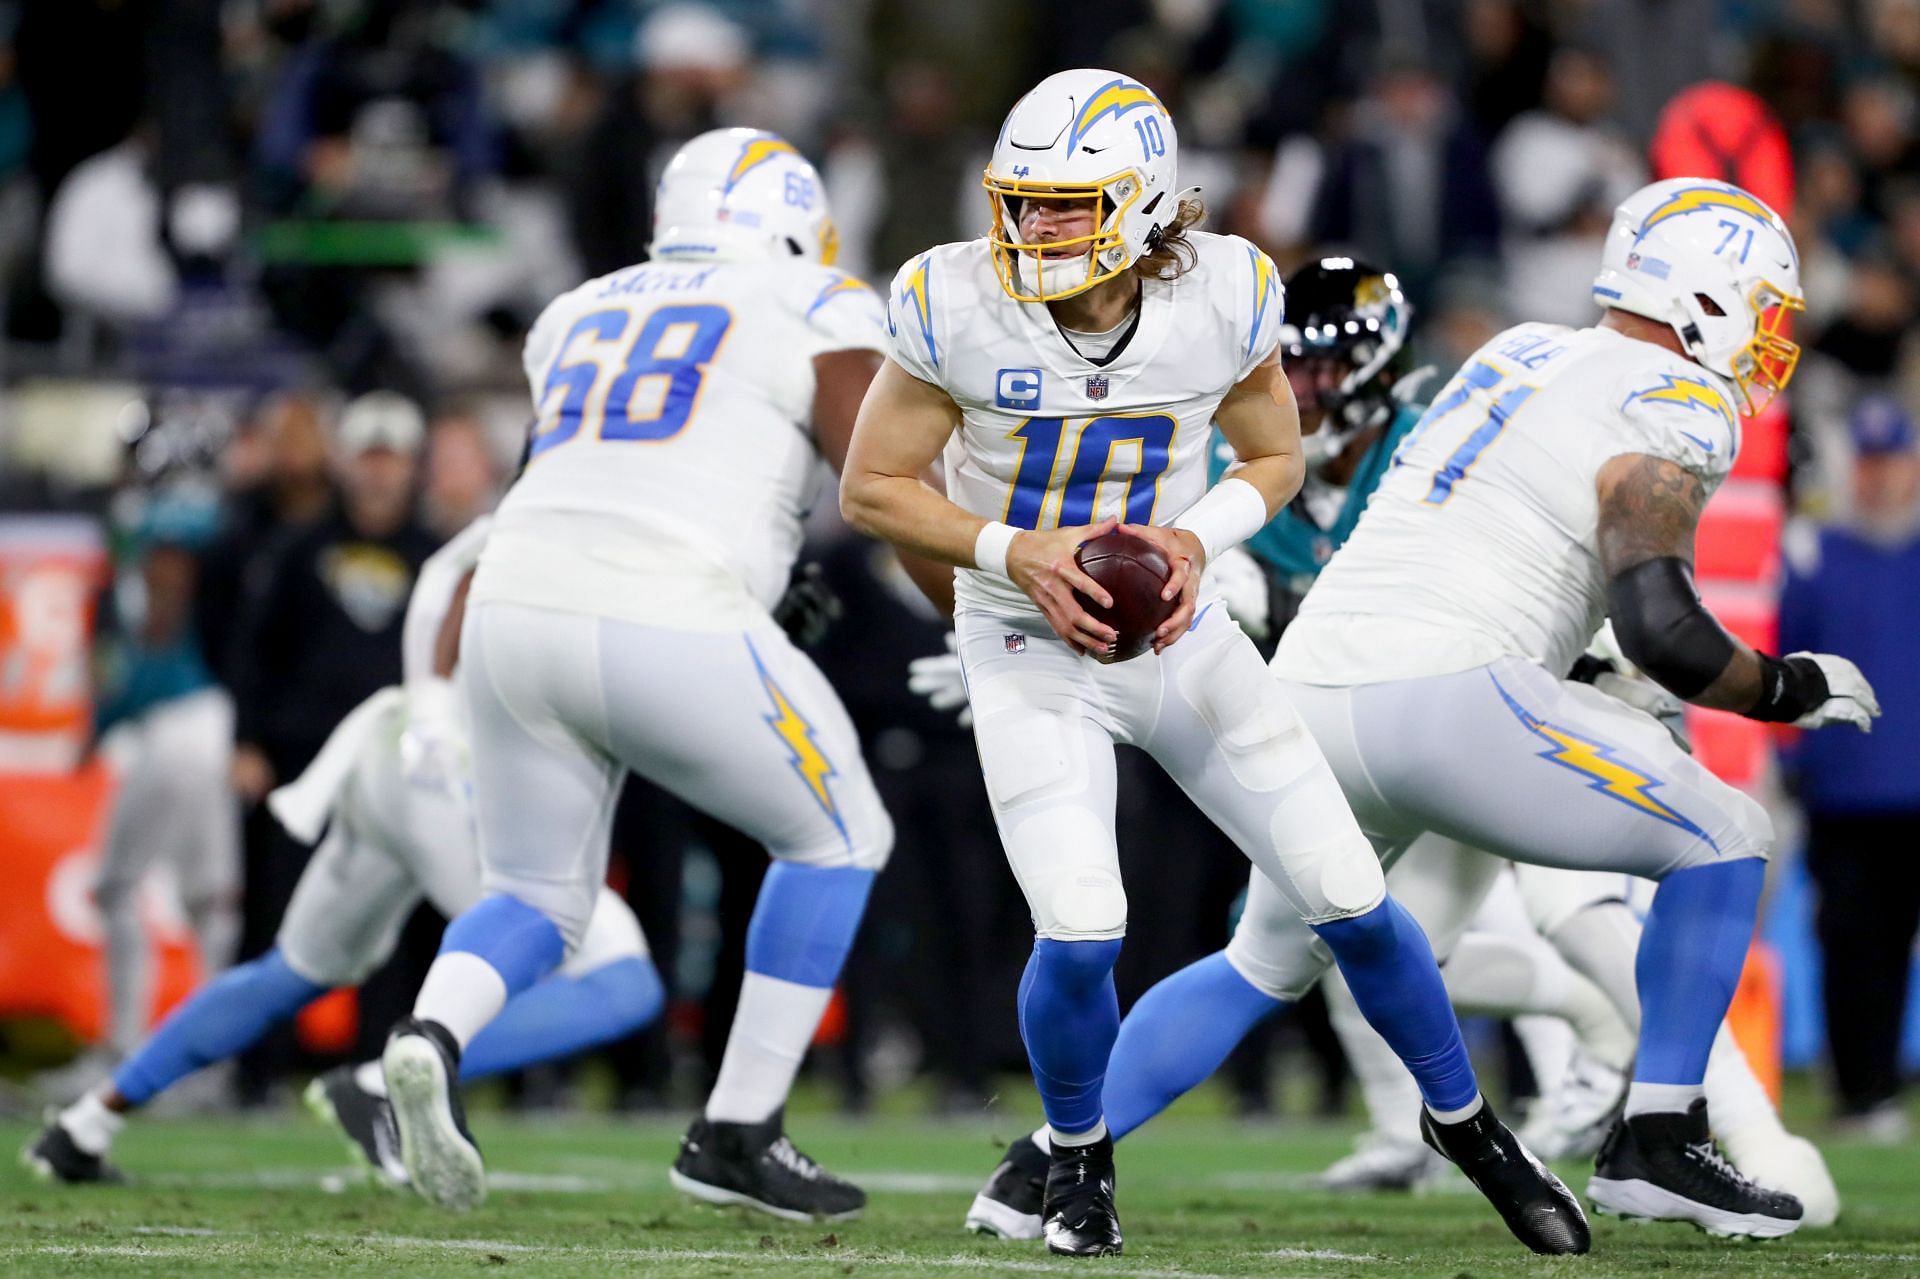 NFL Schedule: Chargers vs. Raiders flexed to 'Sunday Night Football'